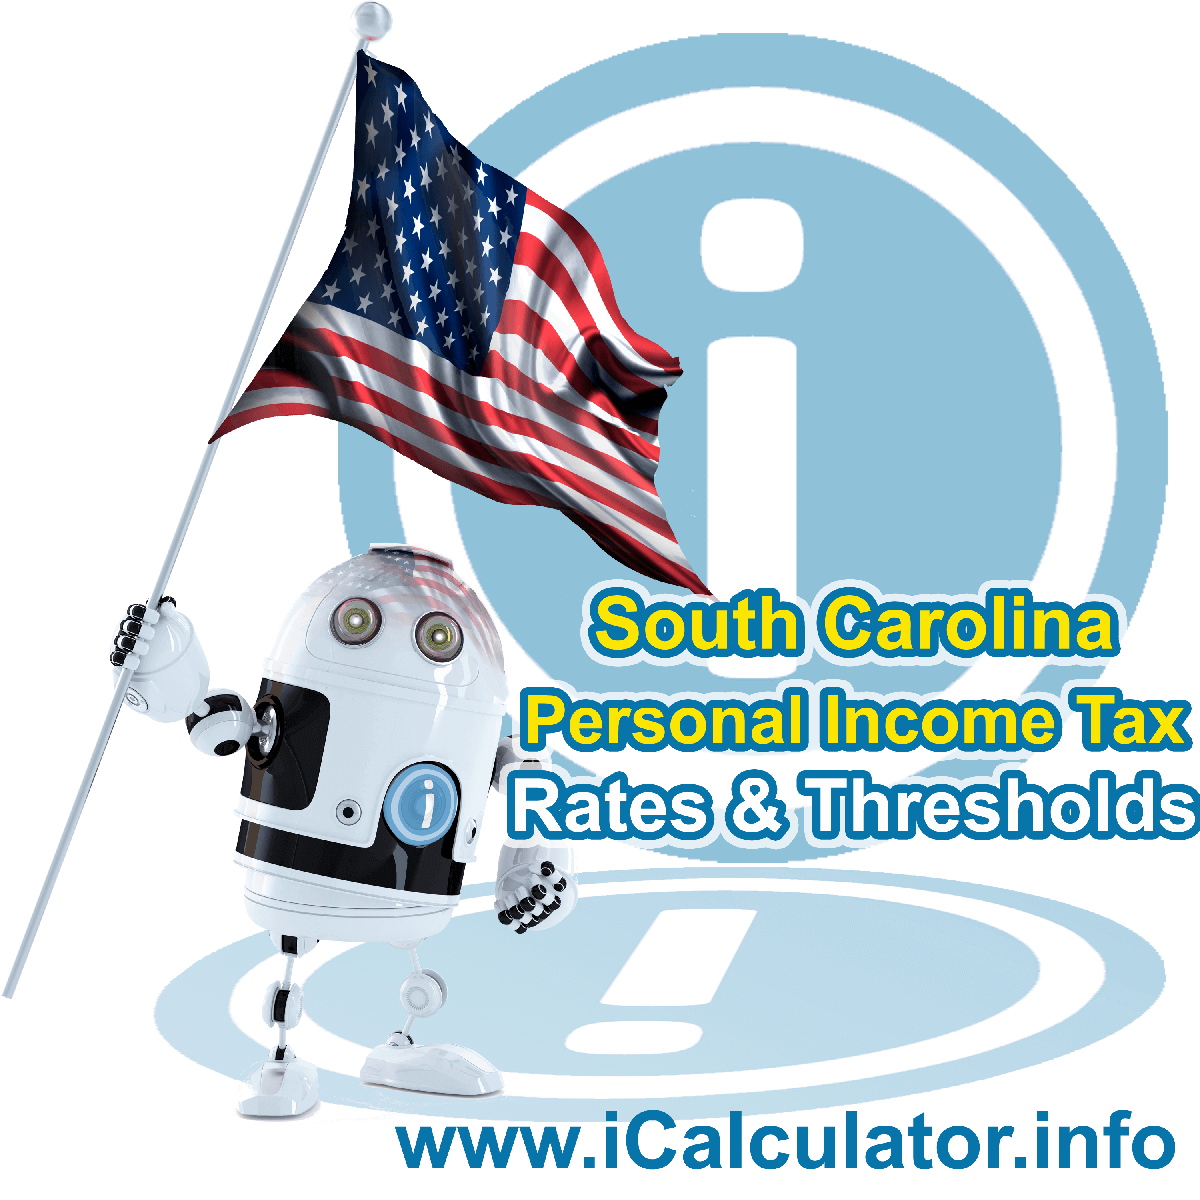 South Carolina State Tax Tables 2015. This image displays details of the South Carolina State Tax Tables for the 2015 tax return year which is provided in support of the 2015 US Tax Calculator